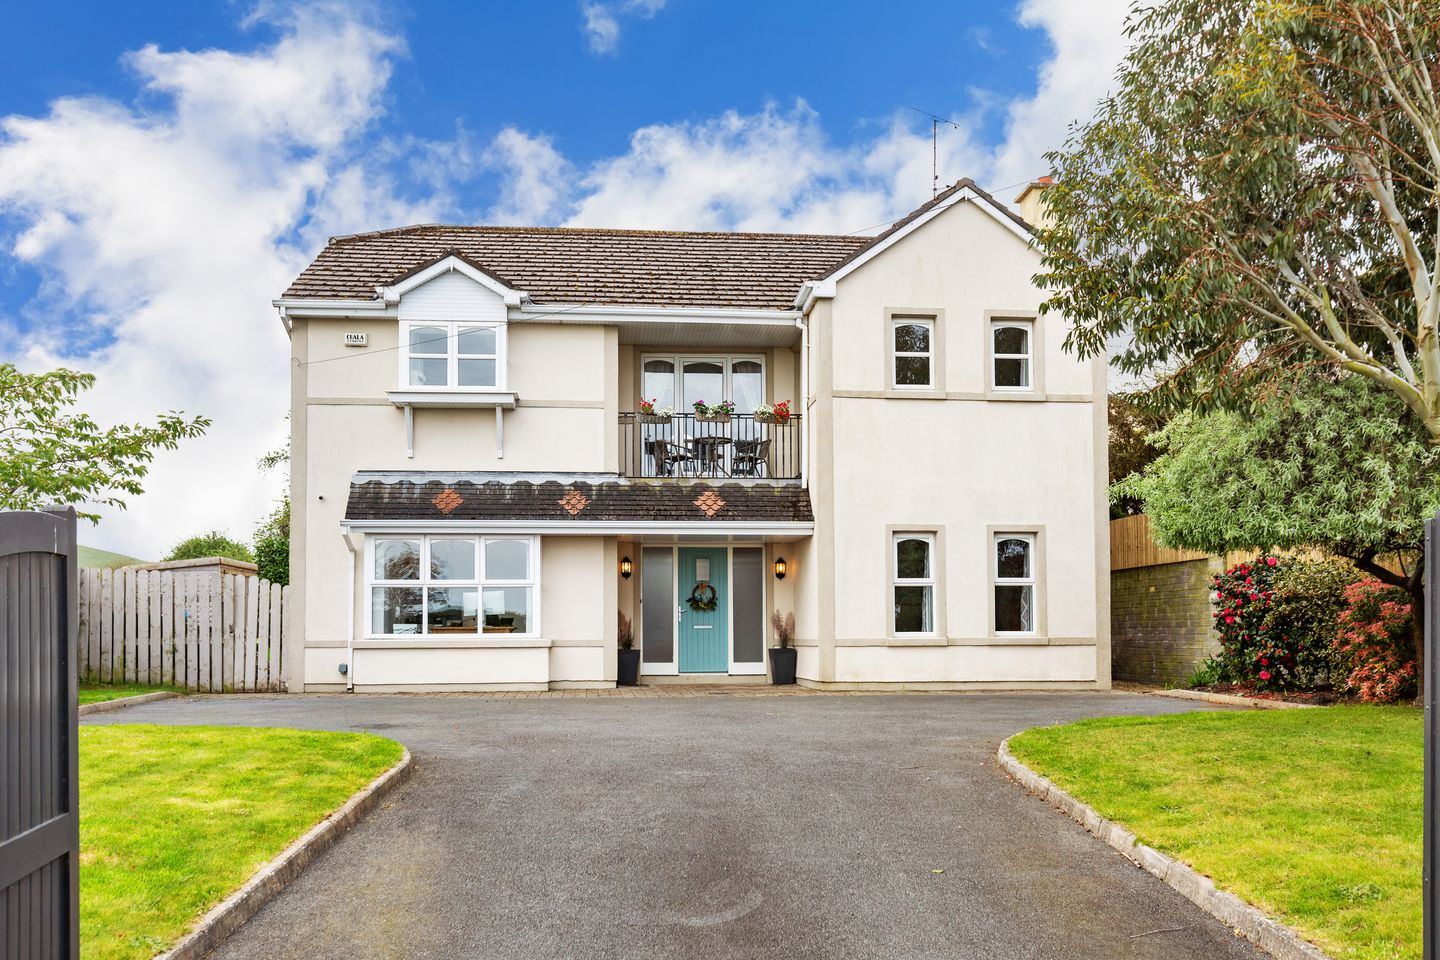 Rocklands, Friars Hill, Wicklow Town, Co. Wicklow, A67D653